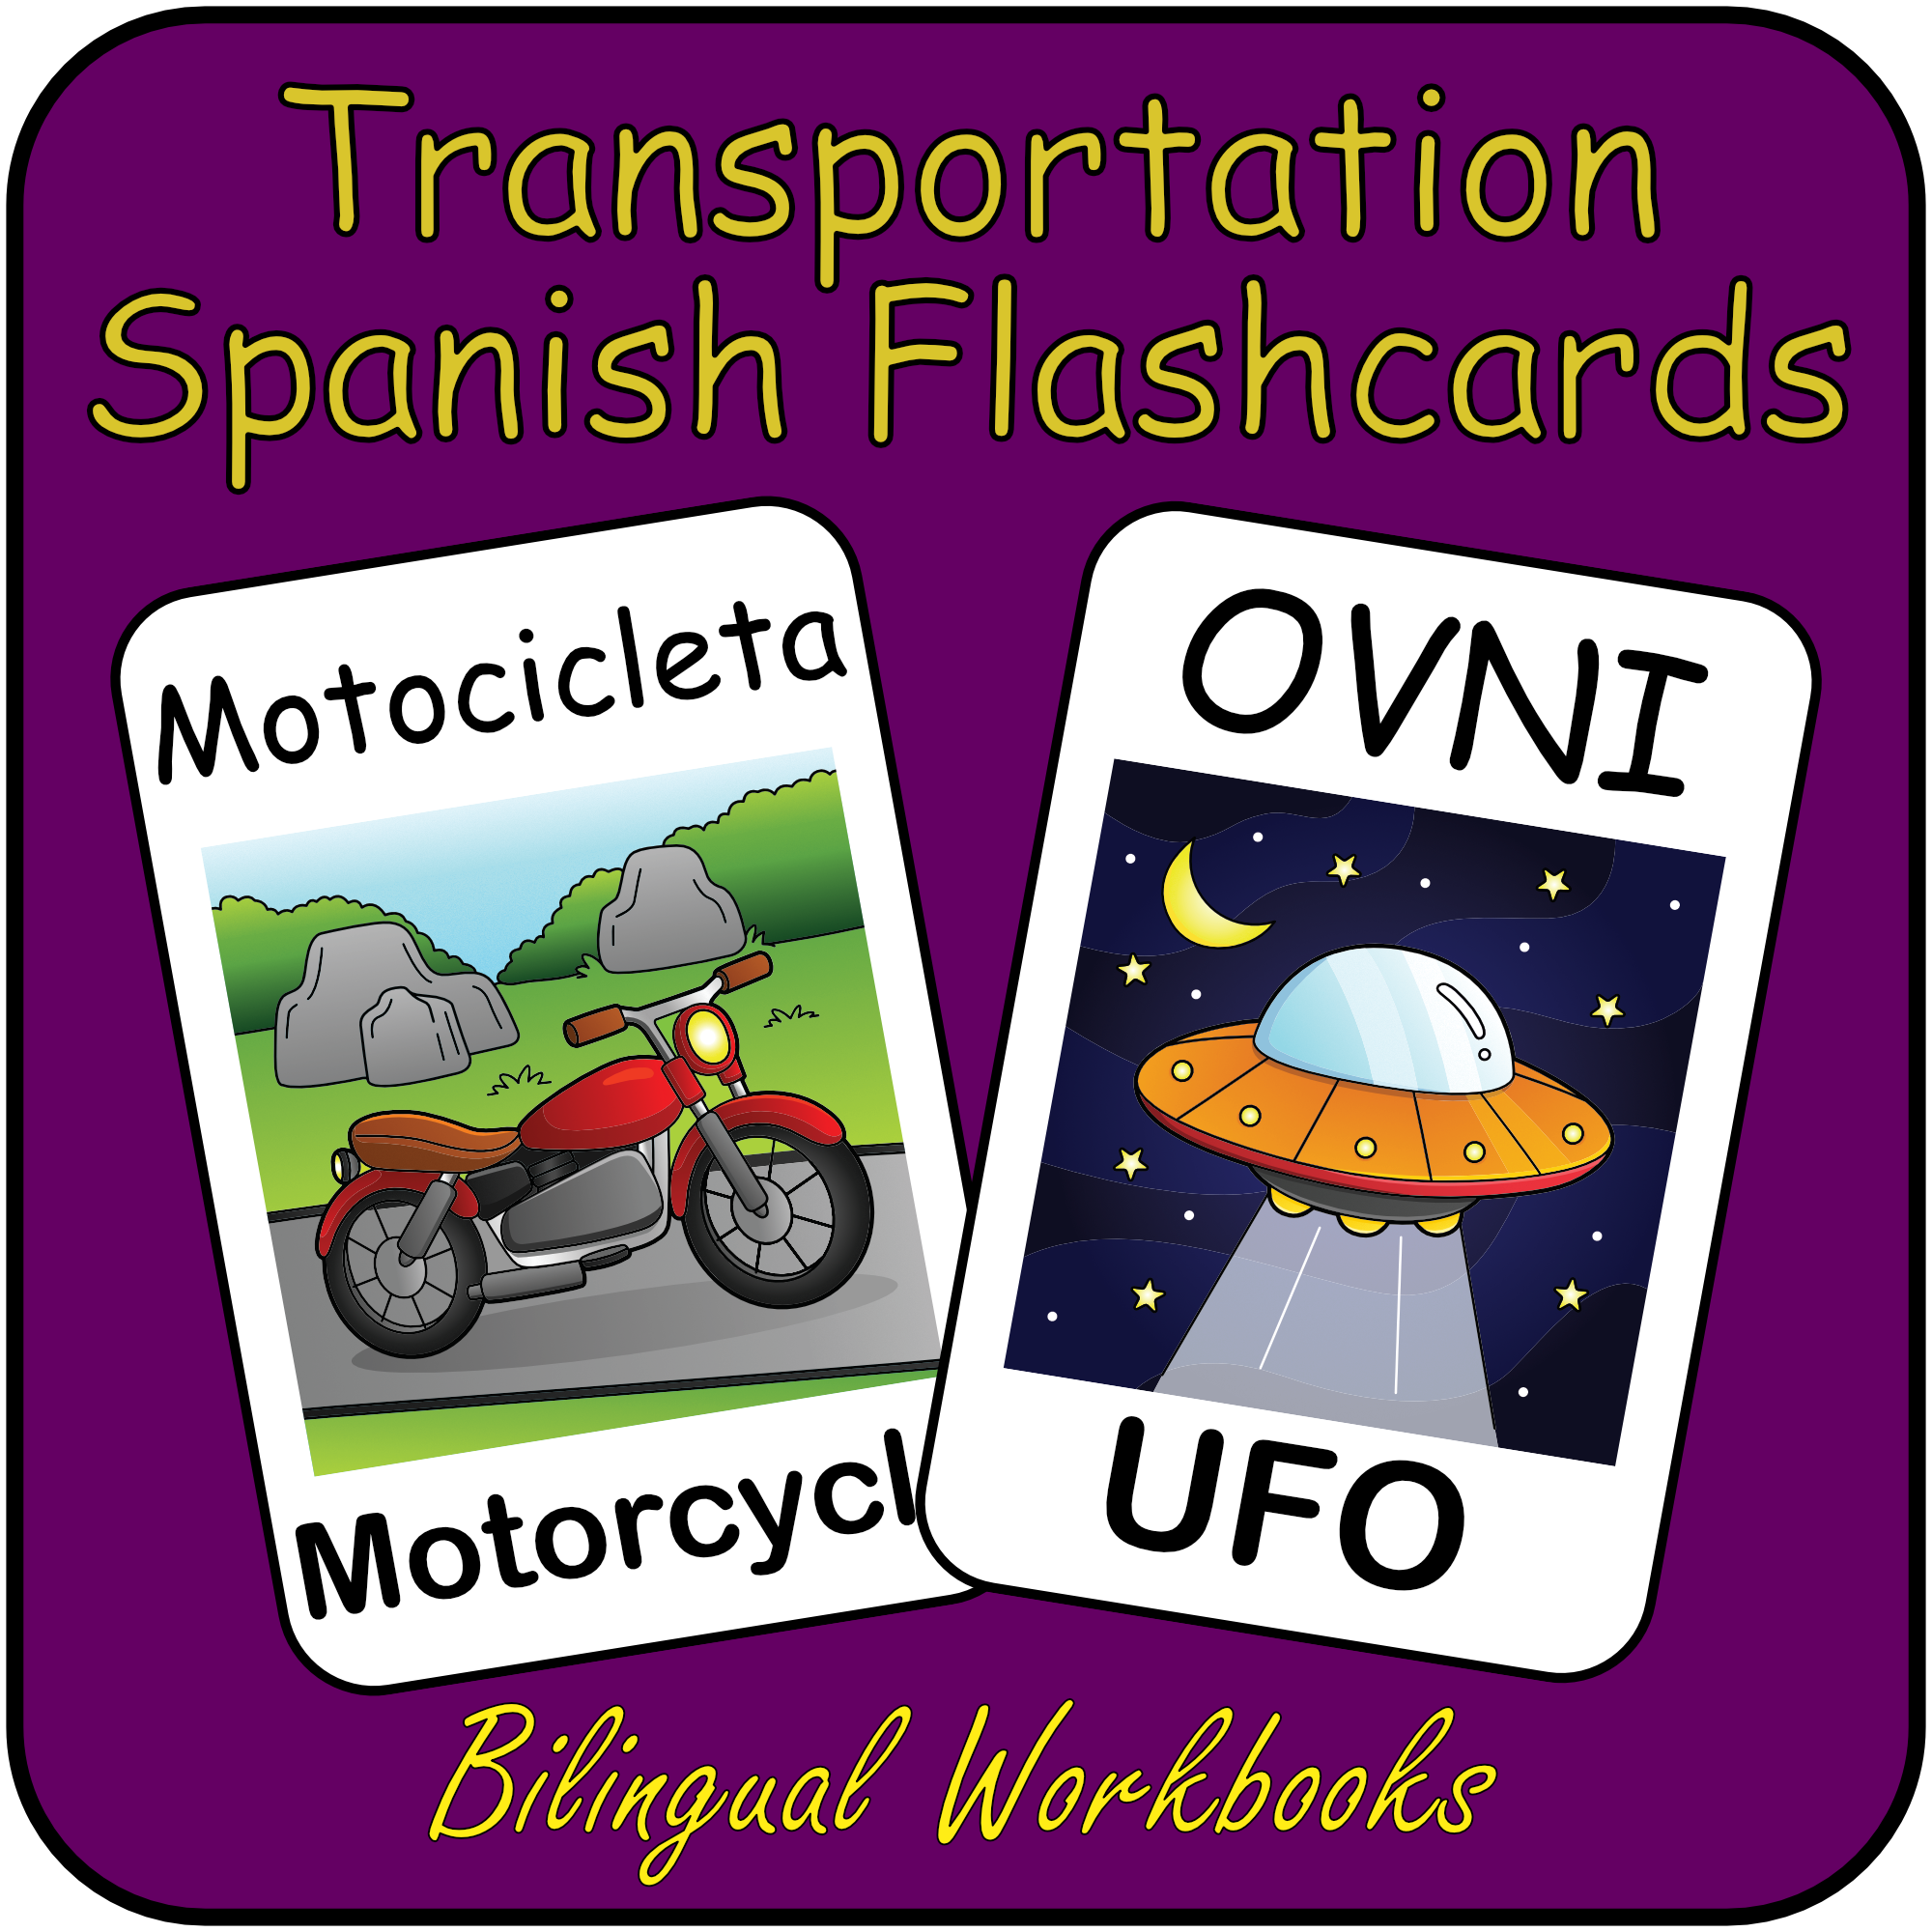 TRANSPORTATION - Spanish Flash Cards - Vocabulary Study flashcards with English and Spanish - Learn or Teach Spanish